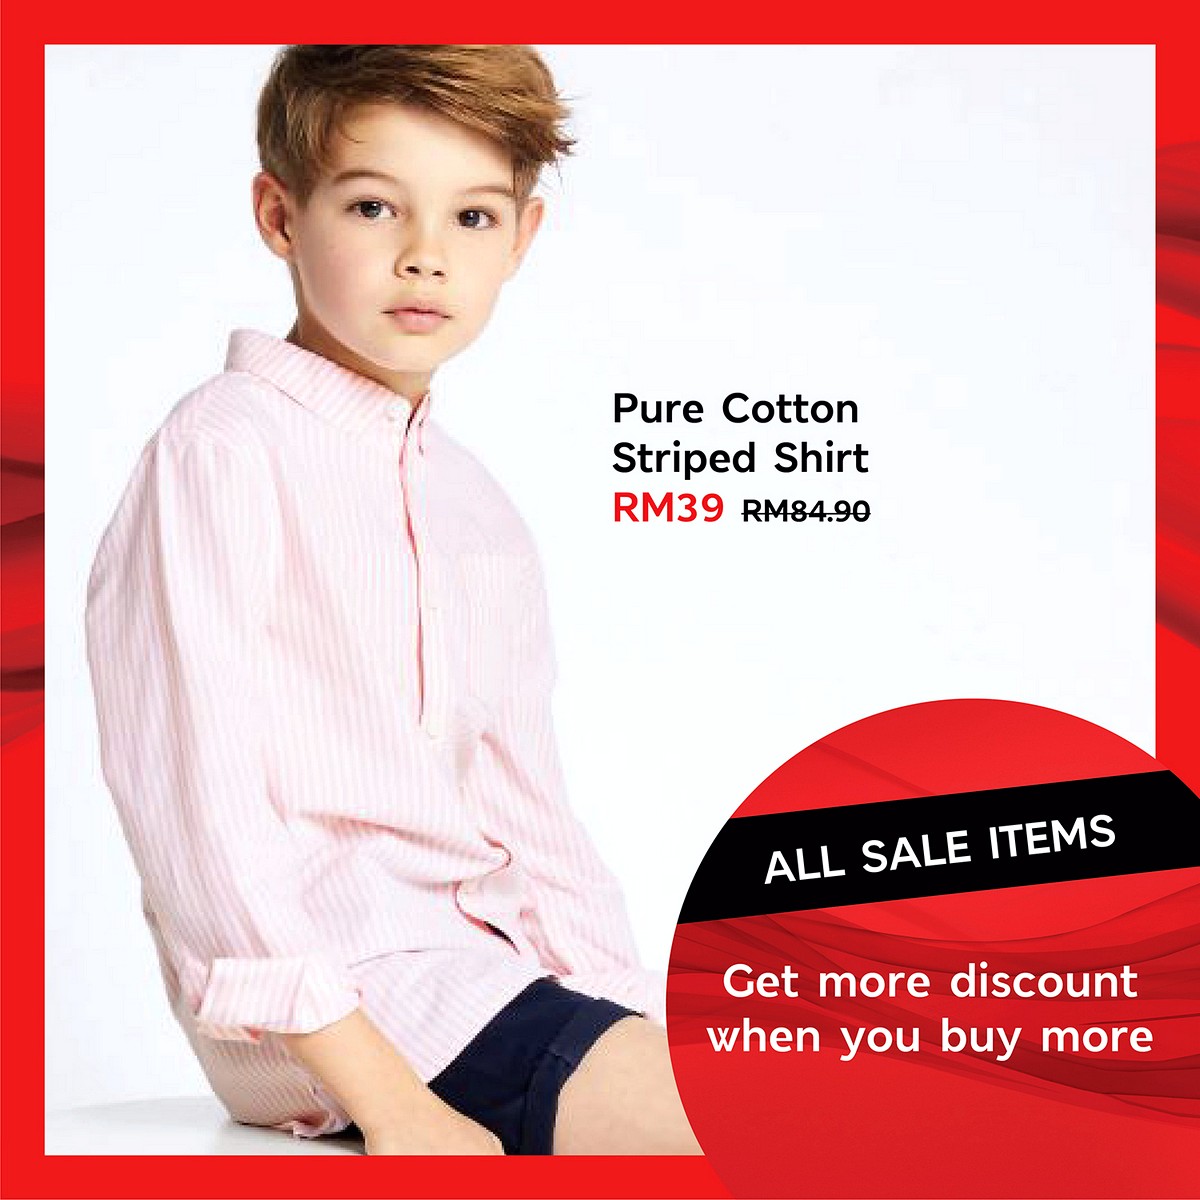 ESS-Extra-Discount_Social-Artwork-16 - Apparels Baby & Kids & Toys Children Fashion Fashion Accessories Fashion Lifestyle & Department Store Johor Kuala Lumpur Lingerie Nationwide Penang Selangor Sportswear Underwear Warehouse Sale & Clearance in Malaysia 